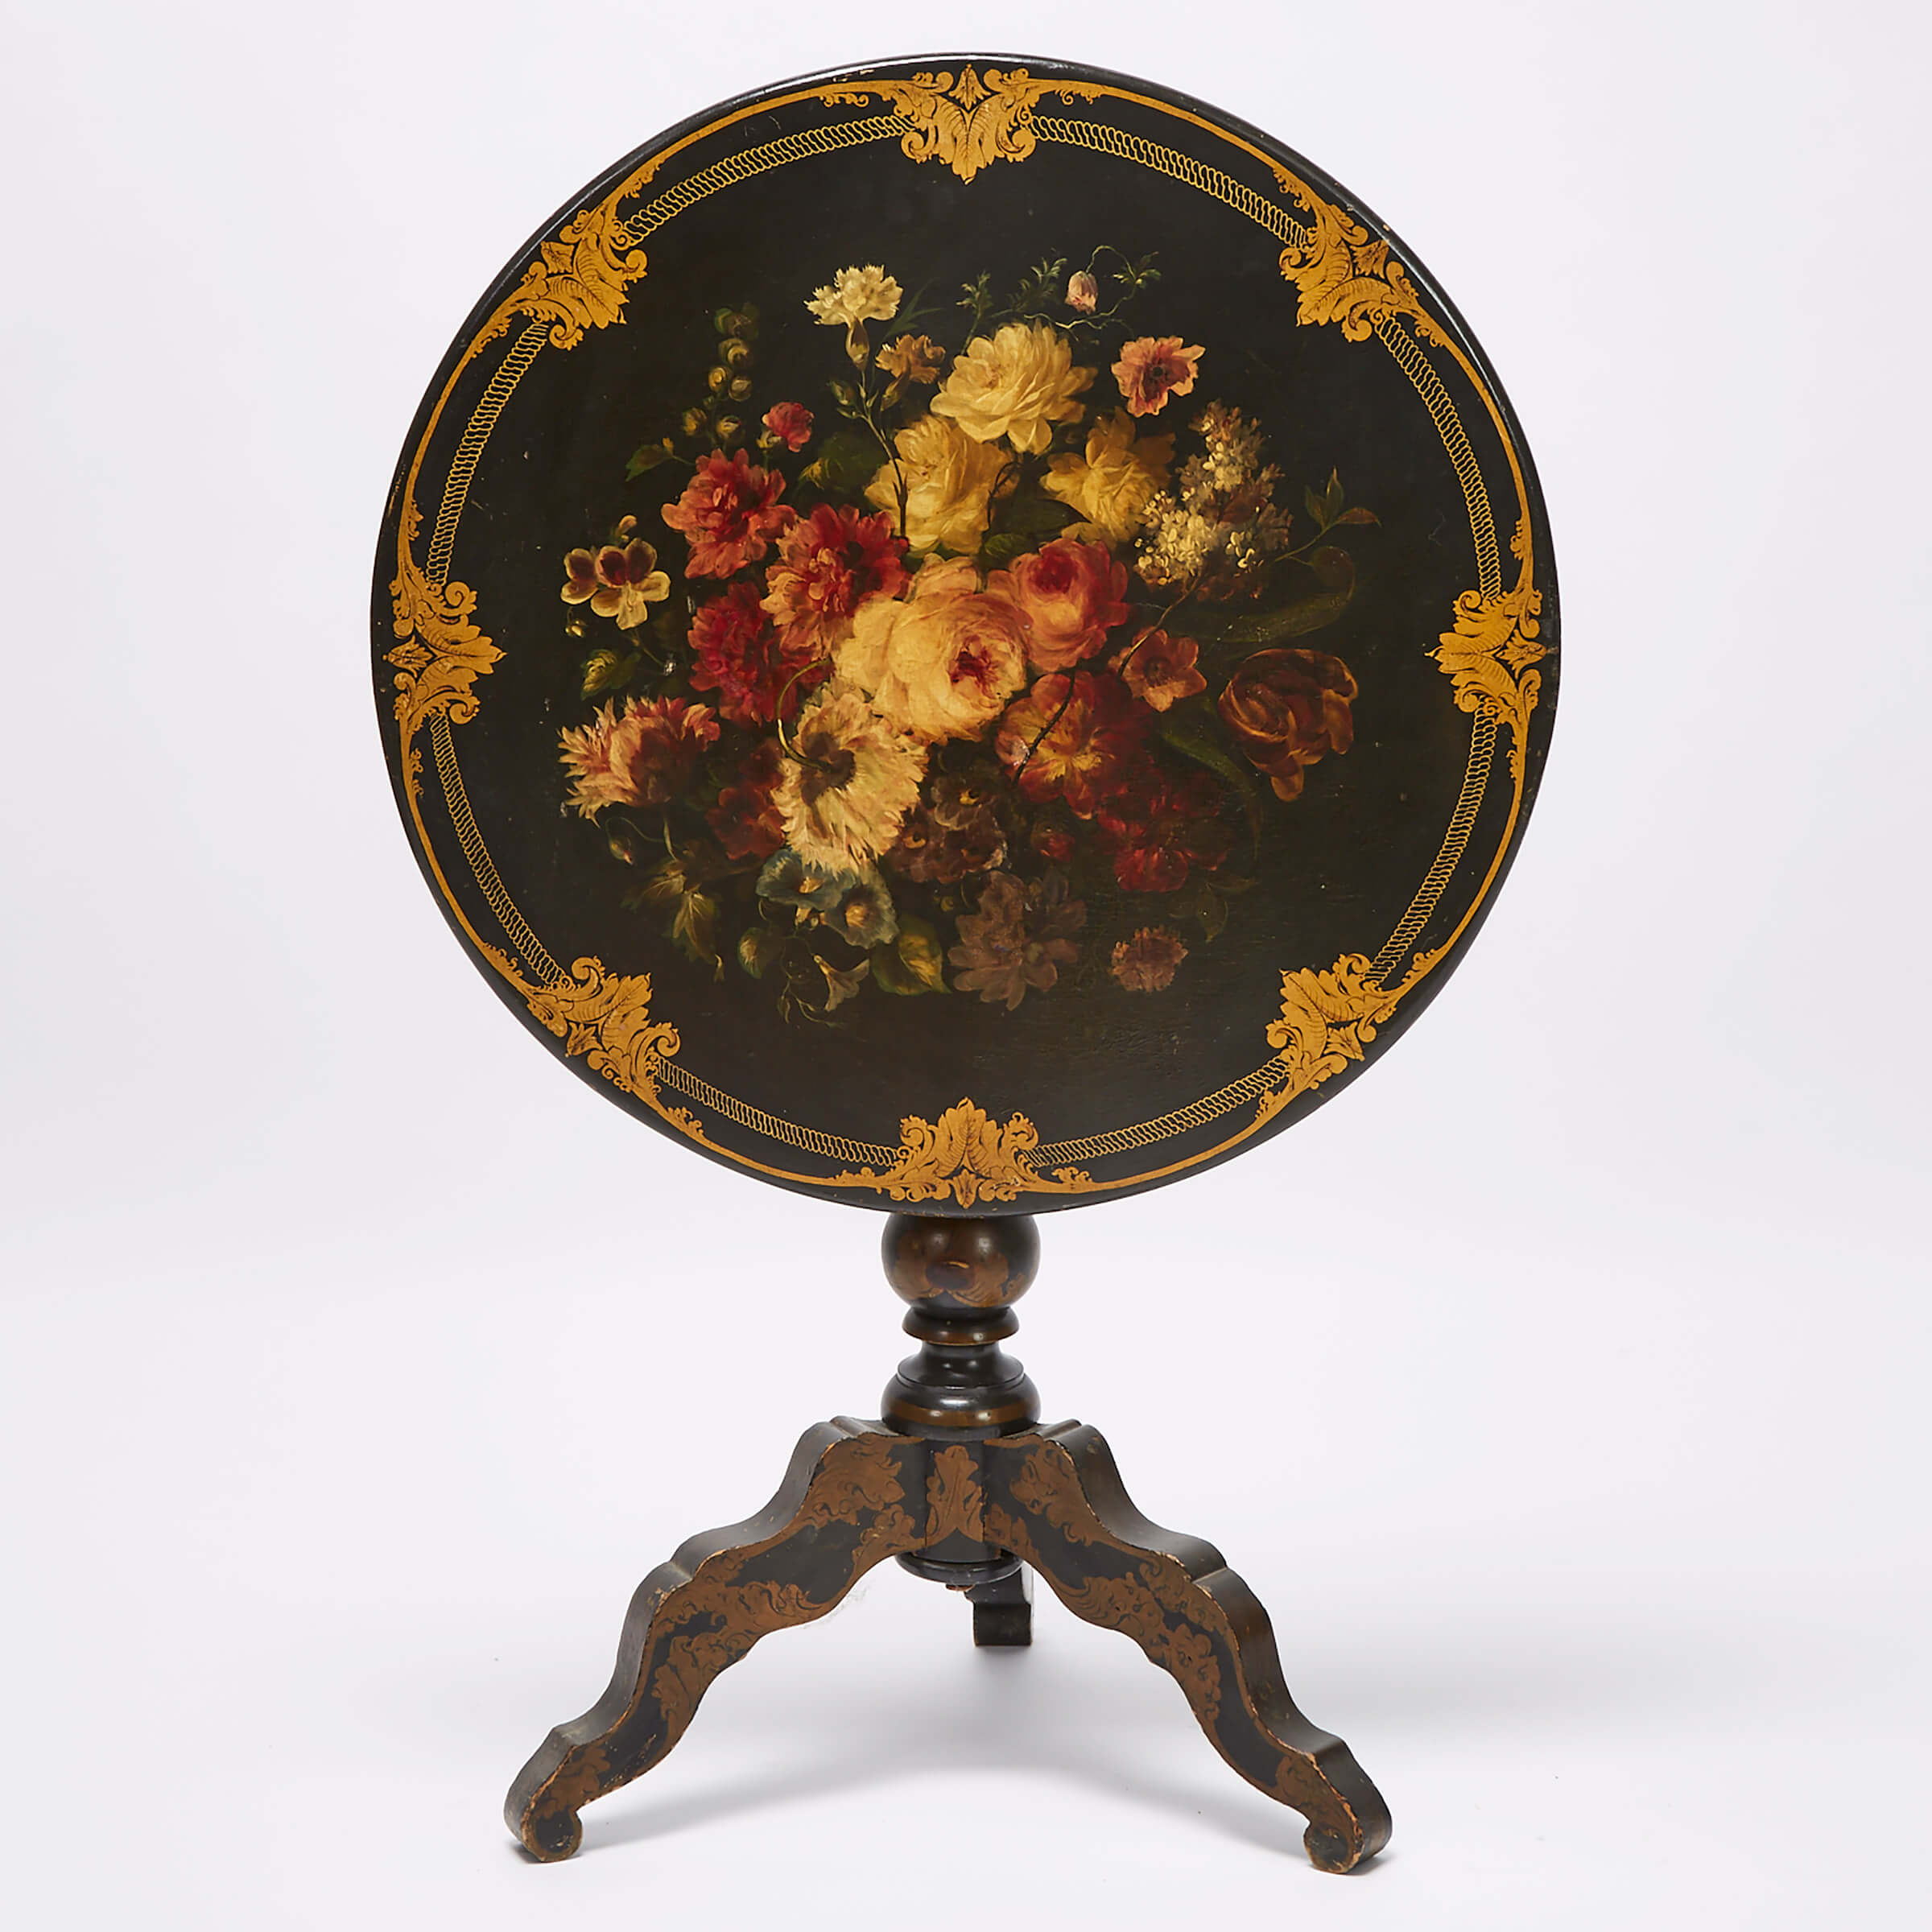 Victorian Painted Tilt Top Table, mid 19th century